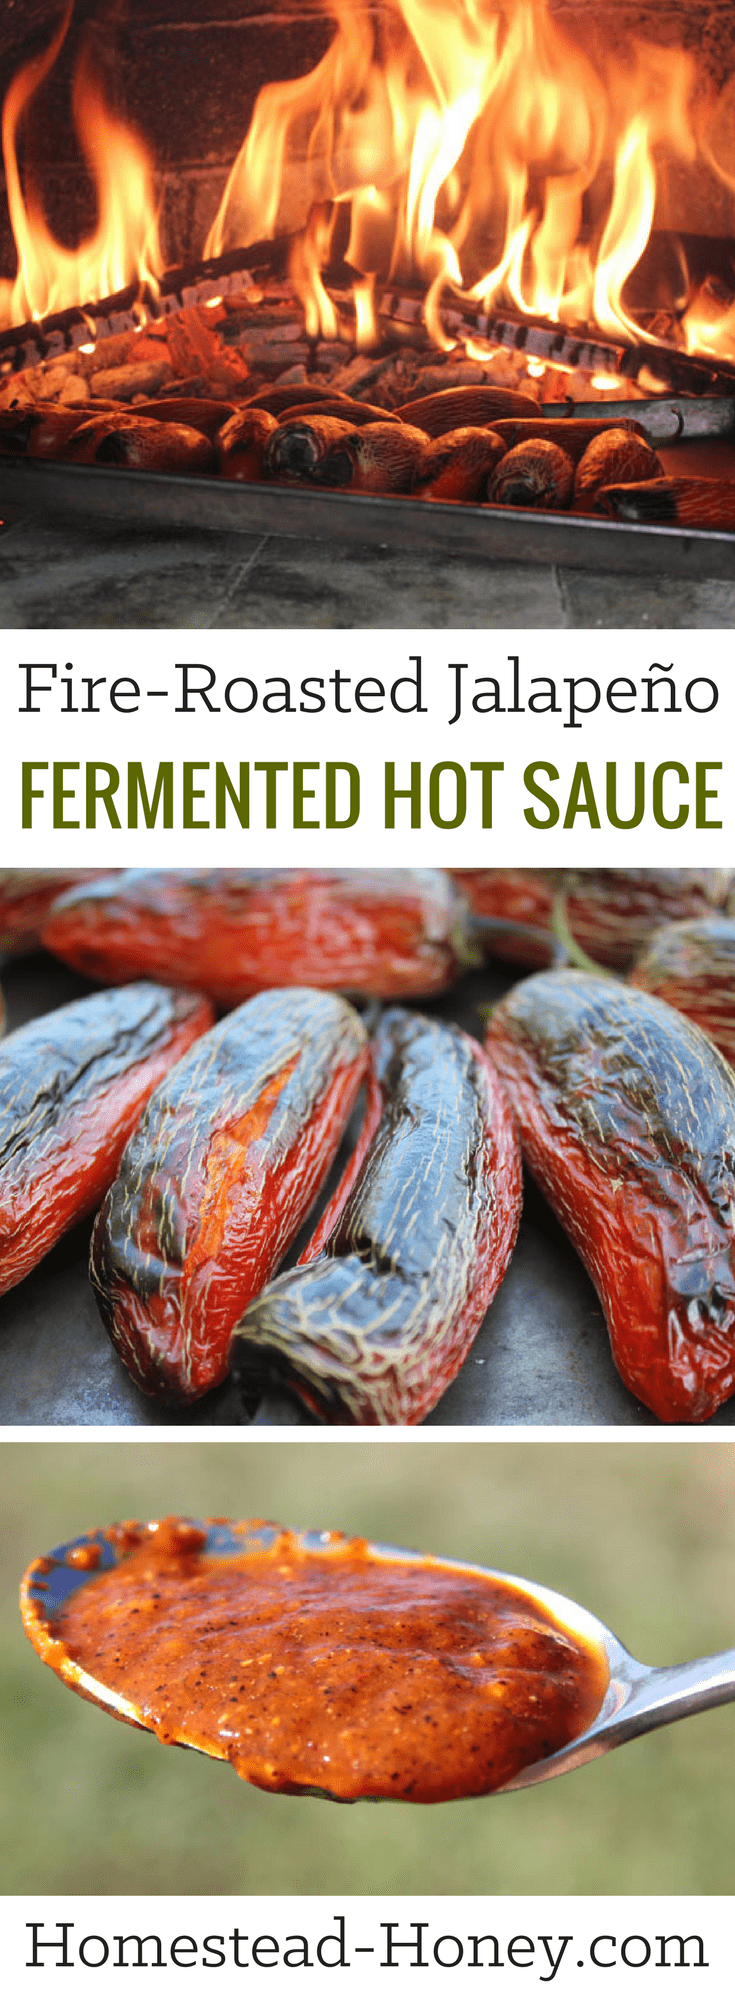 Homemade Fermented Hot Sauce | Tantalize your taste buds with this smoky fermented hot sauce recipe. Fire-roasted jalapenos are naturally fermented to create a spicy, smoky, and tangy hot sauce that will blow your mind! Sure to become a table staple...and be sure to make extra for gifts! | Homestead Honey #fermentedfood, #homesteading